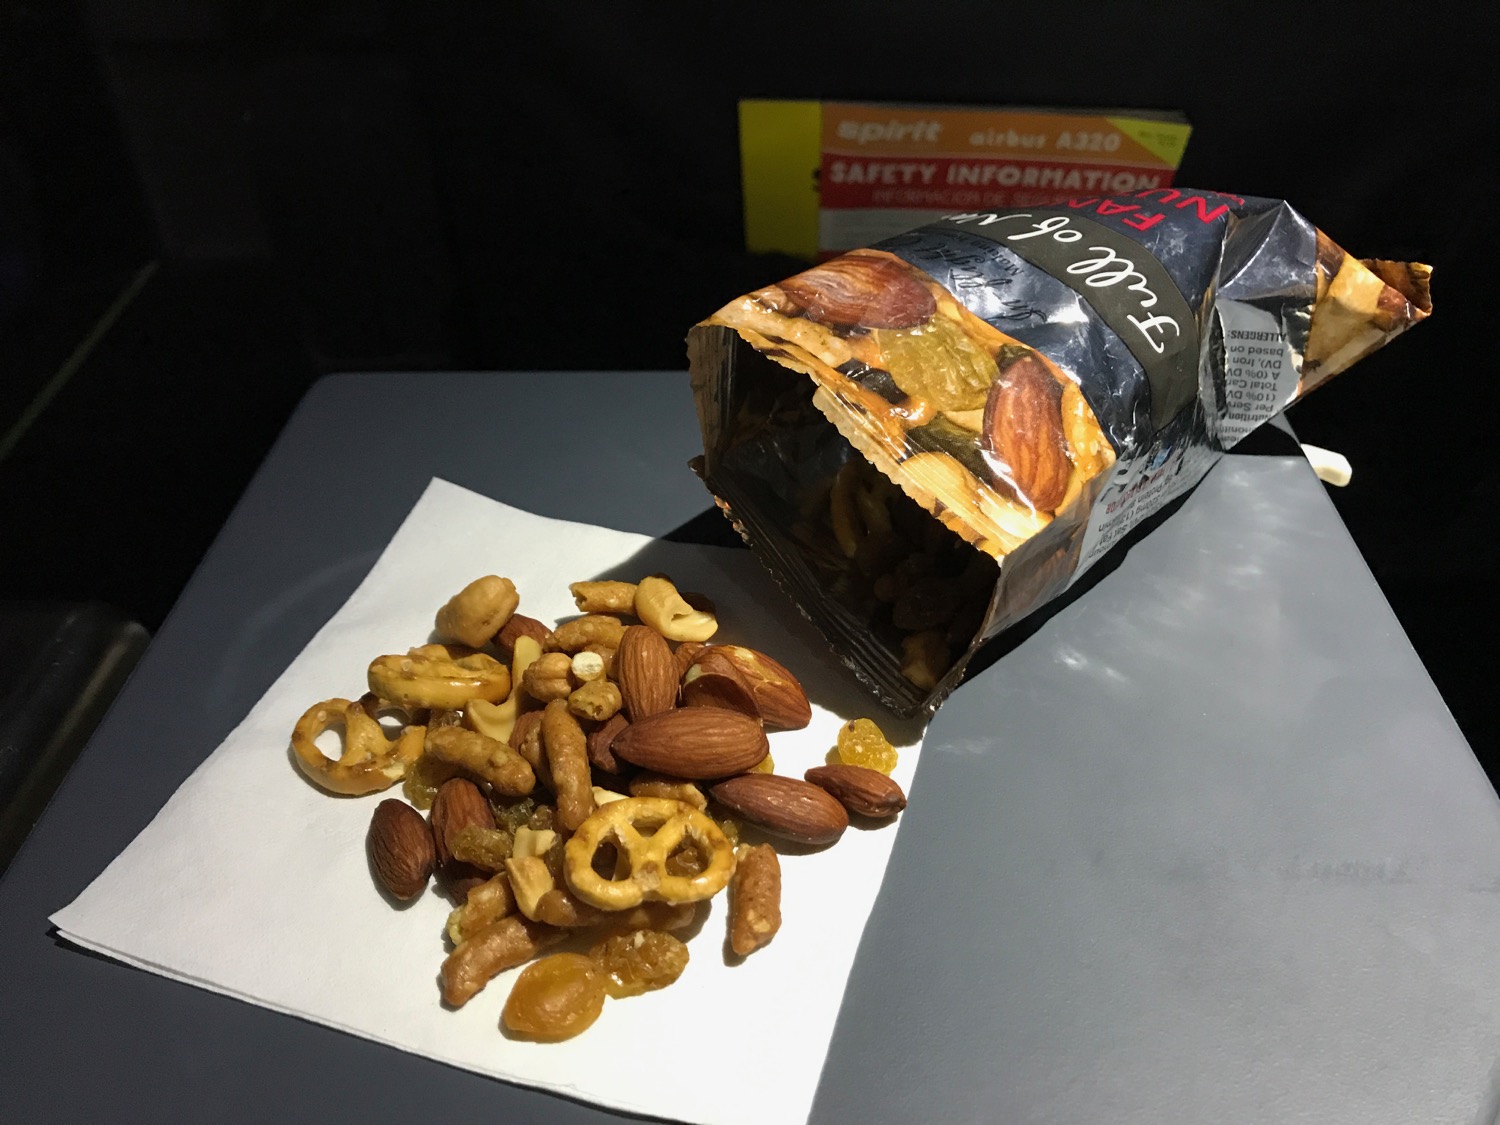 a bag of nuts and pretzels on a table